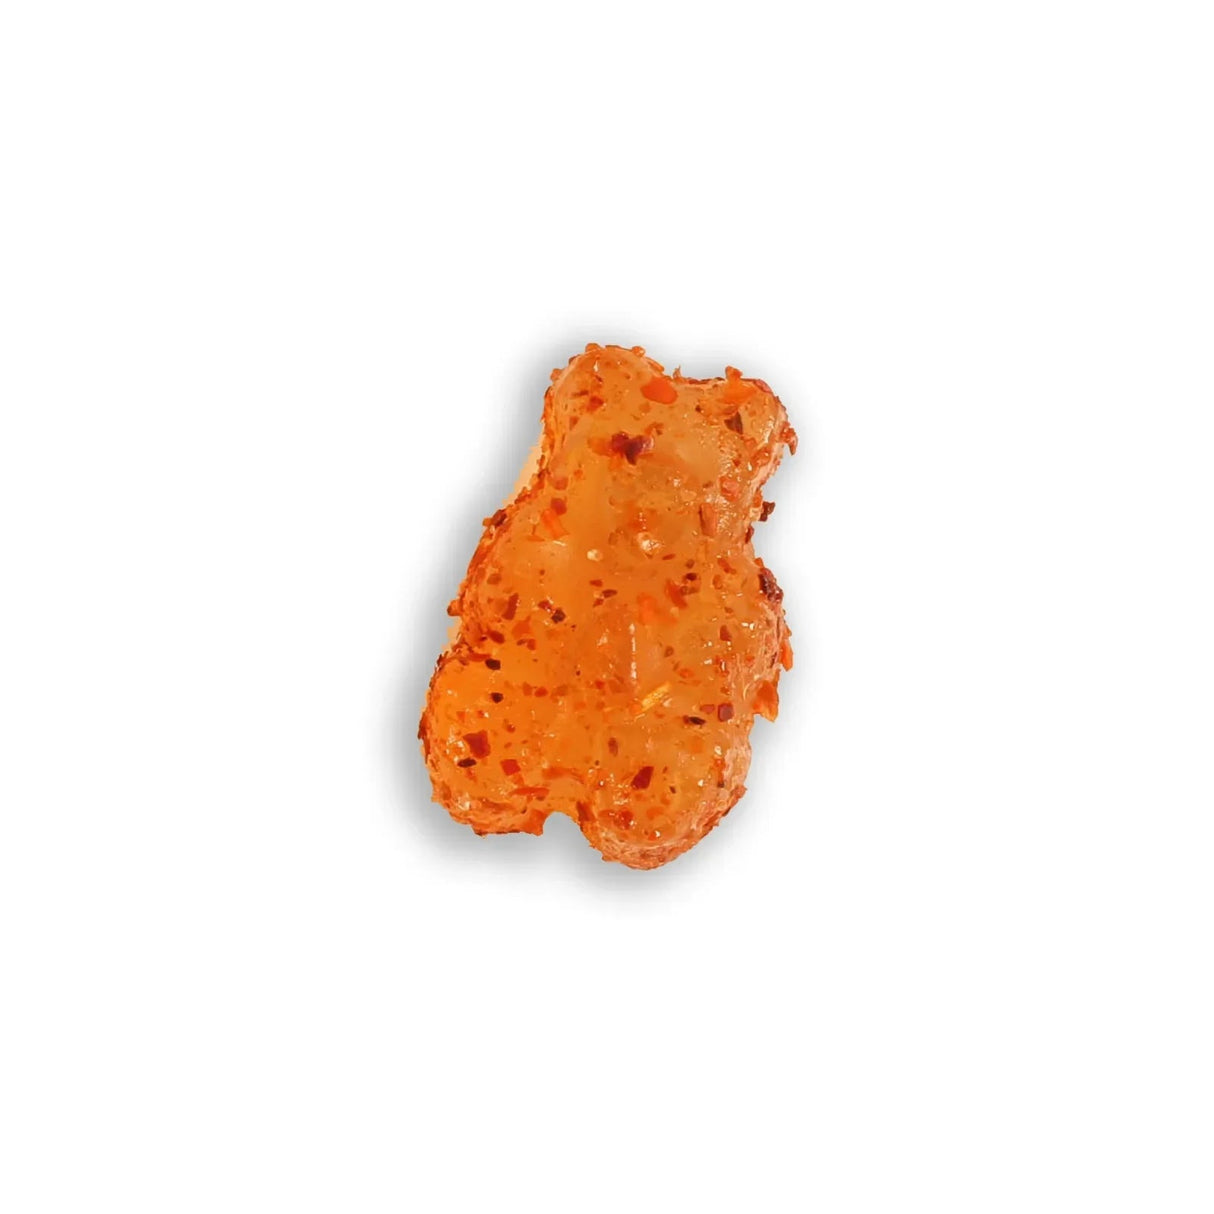 CHILLY BOMBA Chilli Bomba Spicy Gummy Bears 8oz pack, top view on white background